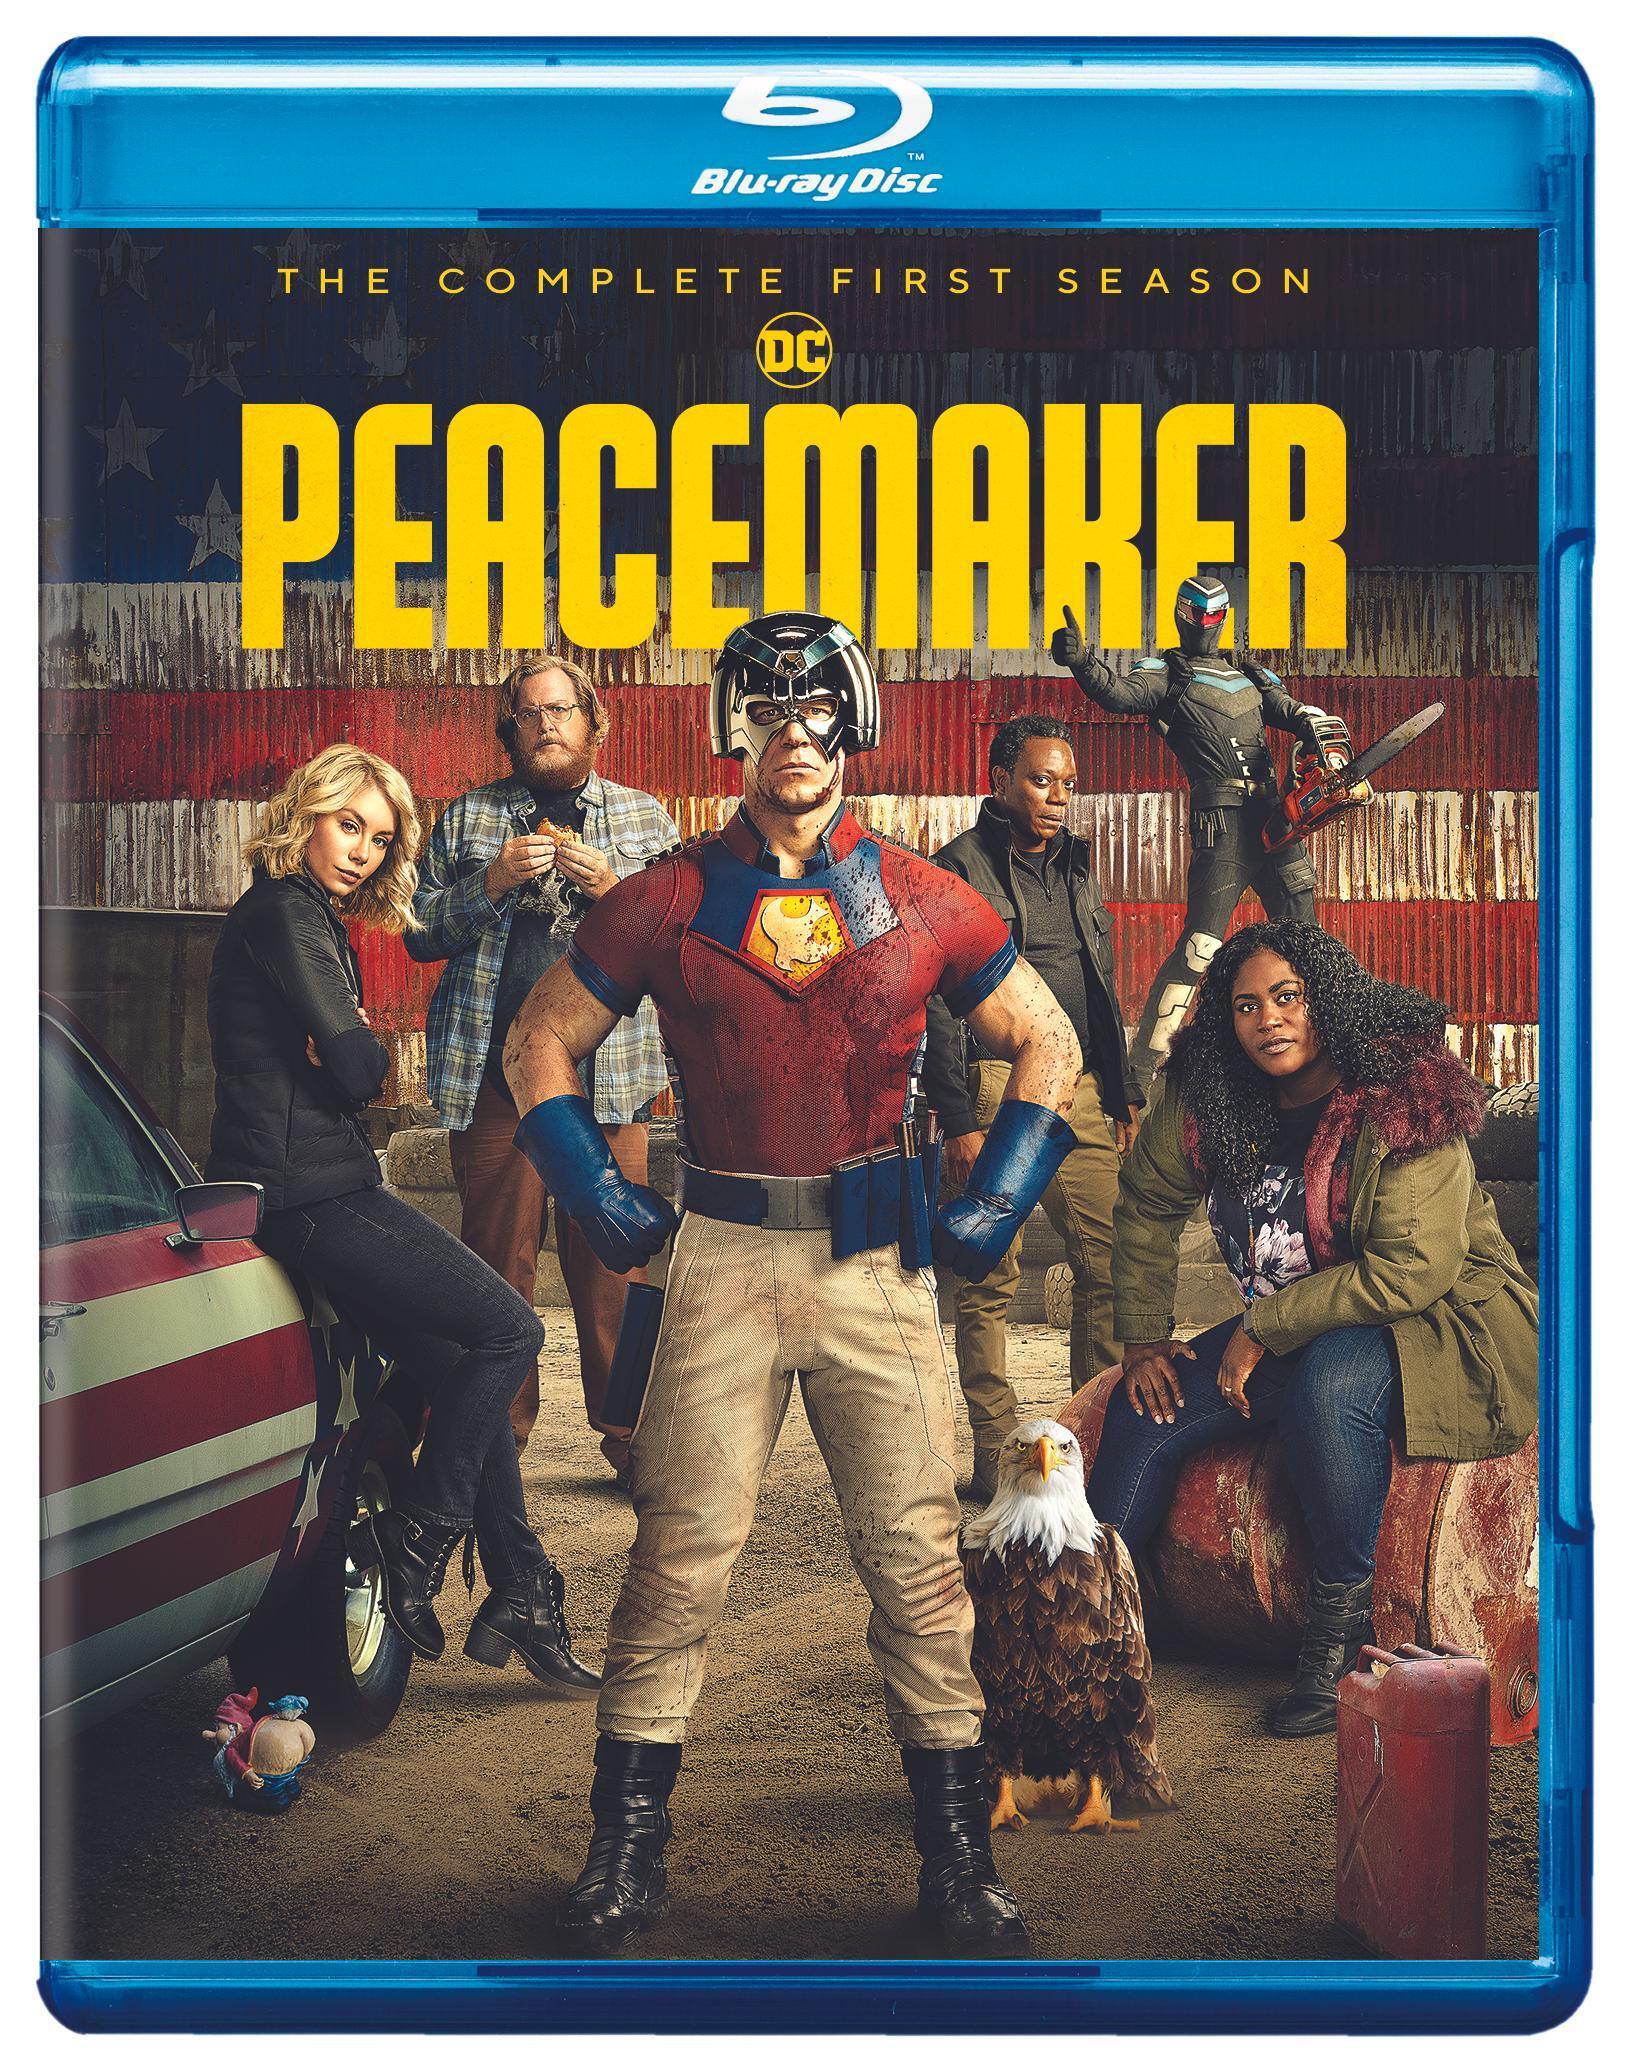 Peacemaker: The Complete First Season (Blu-ray + Digital Copy) - Blu-ray [ 2022 ]  - Comedy Television On Blu-ray - TV Shows On GRUV